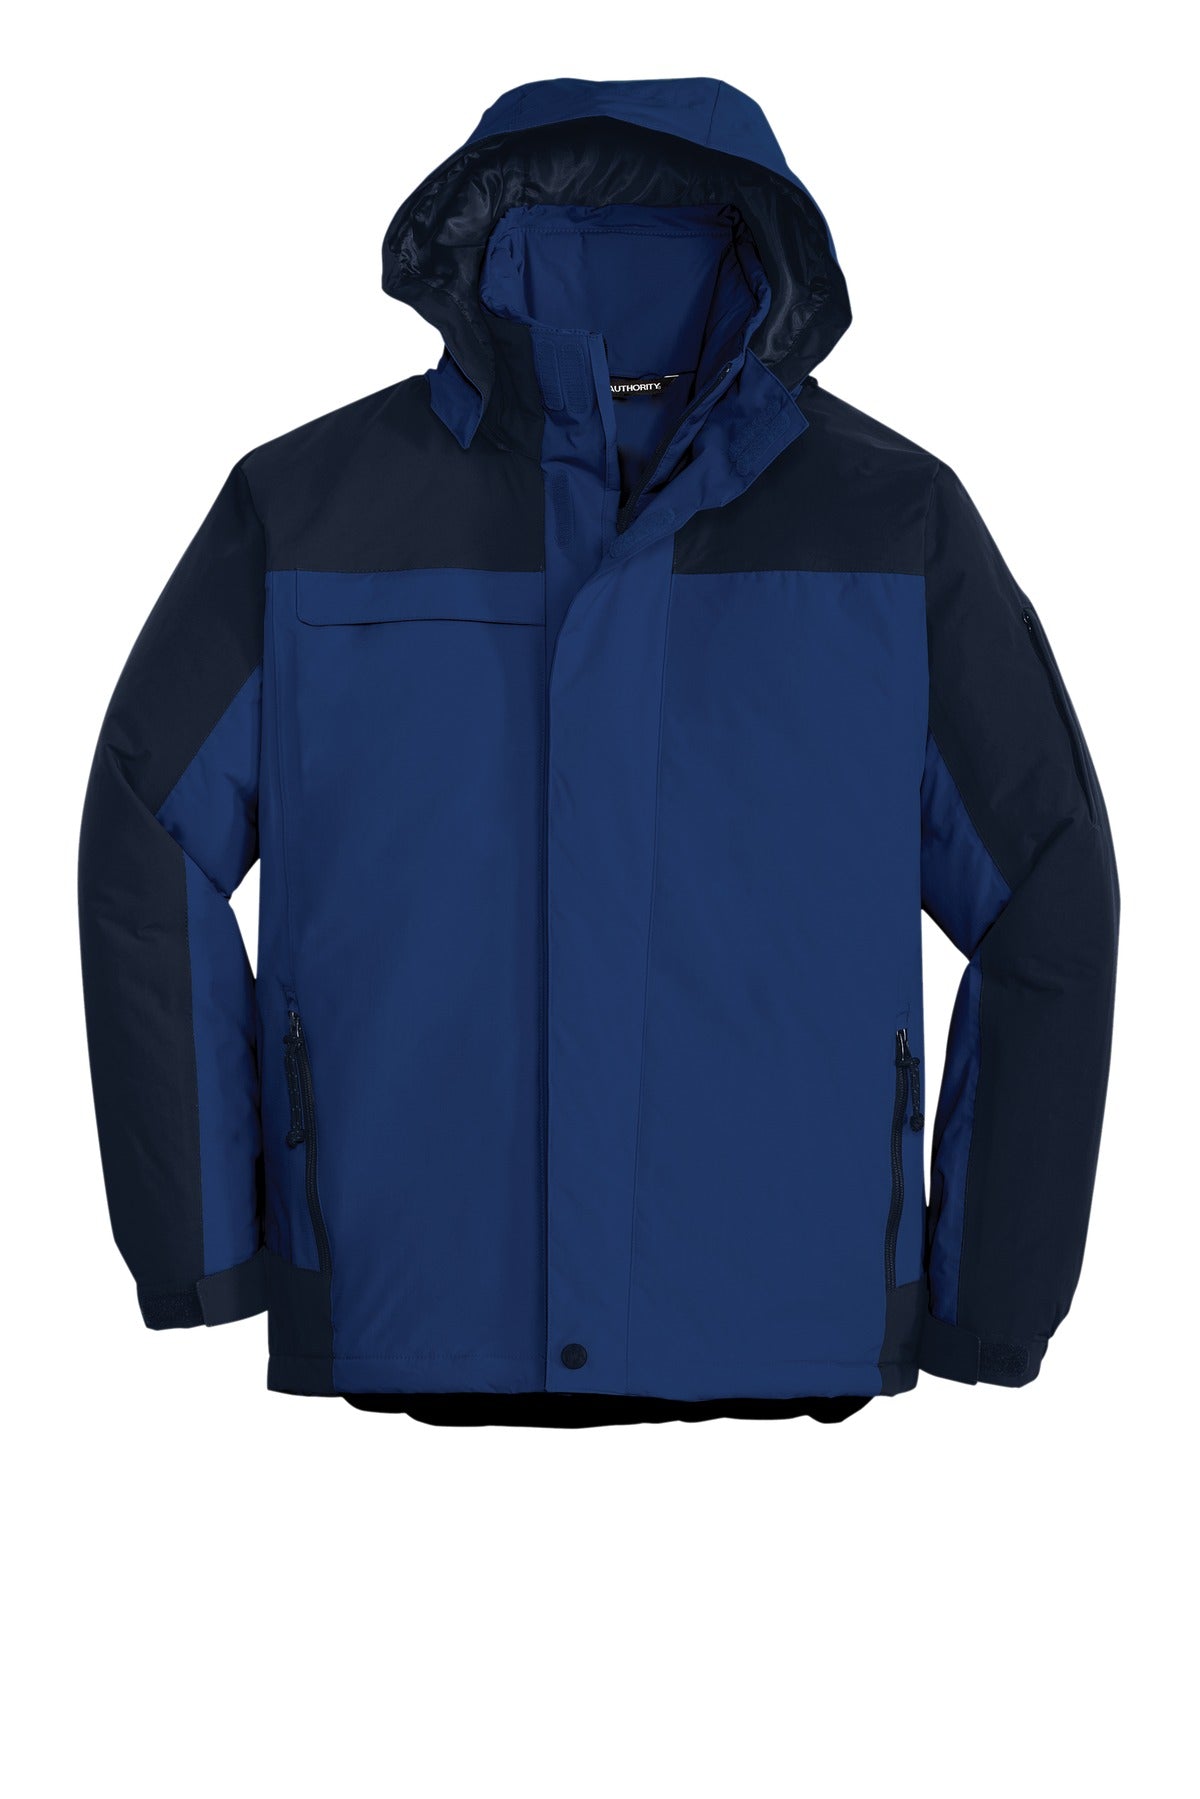 Port Authority Men's Tall Nootka Jacket. TLJ792 – League Outfitters